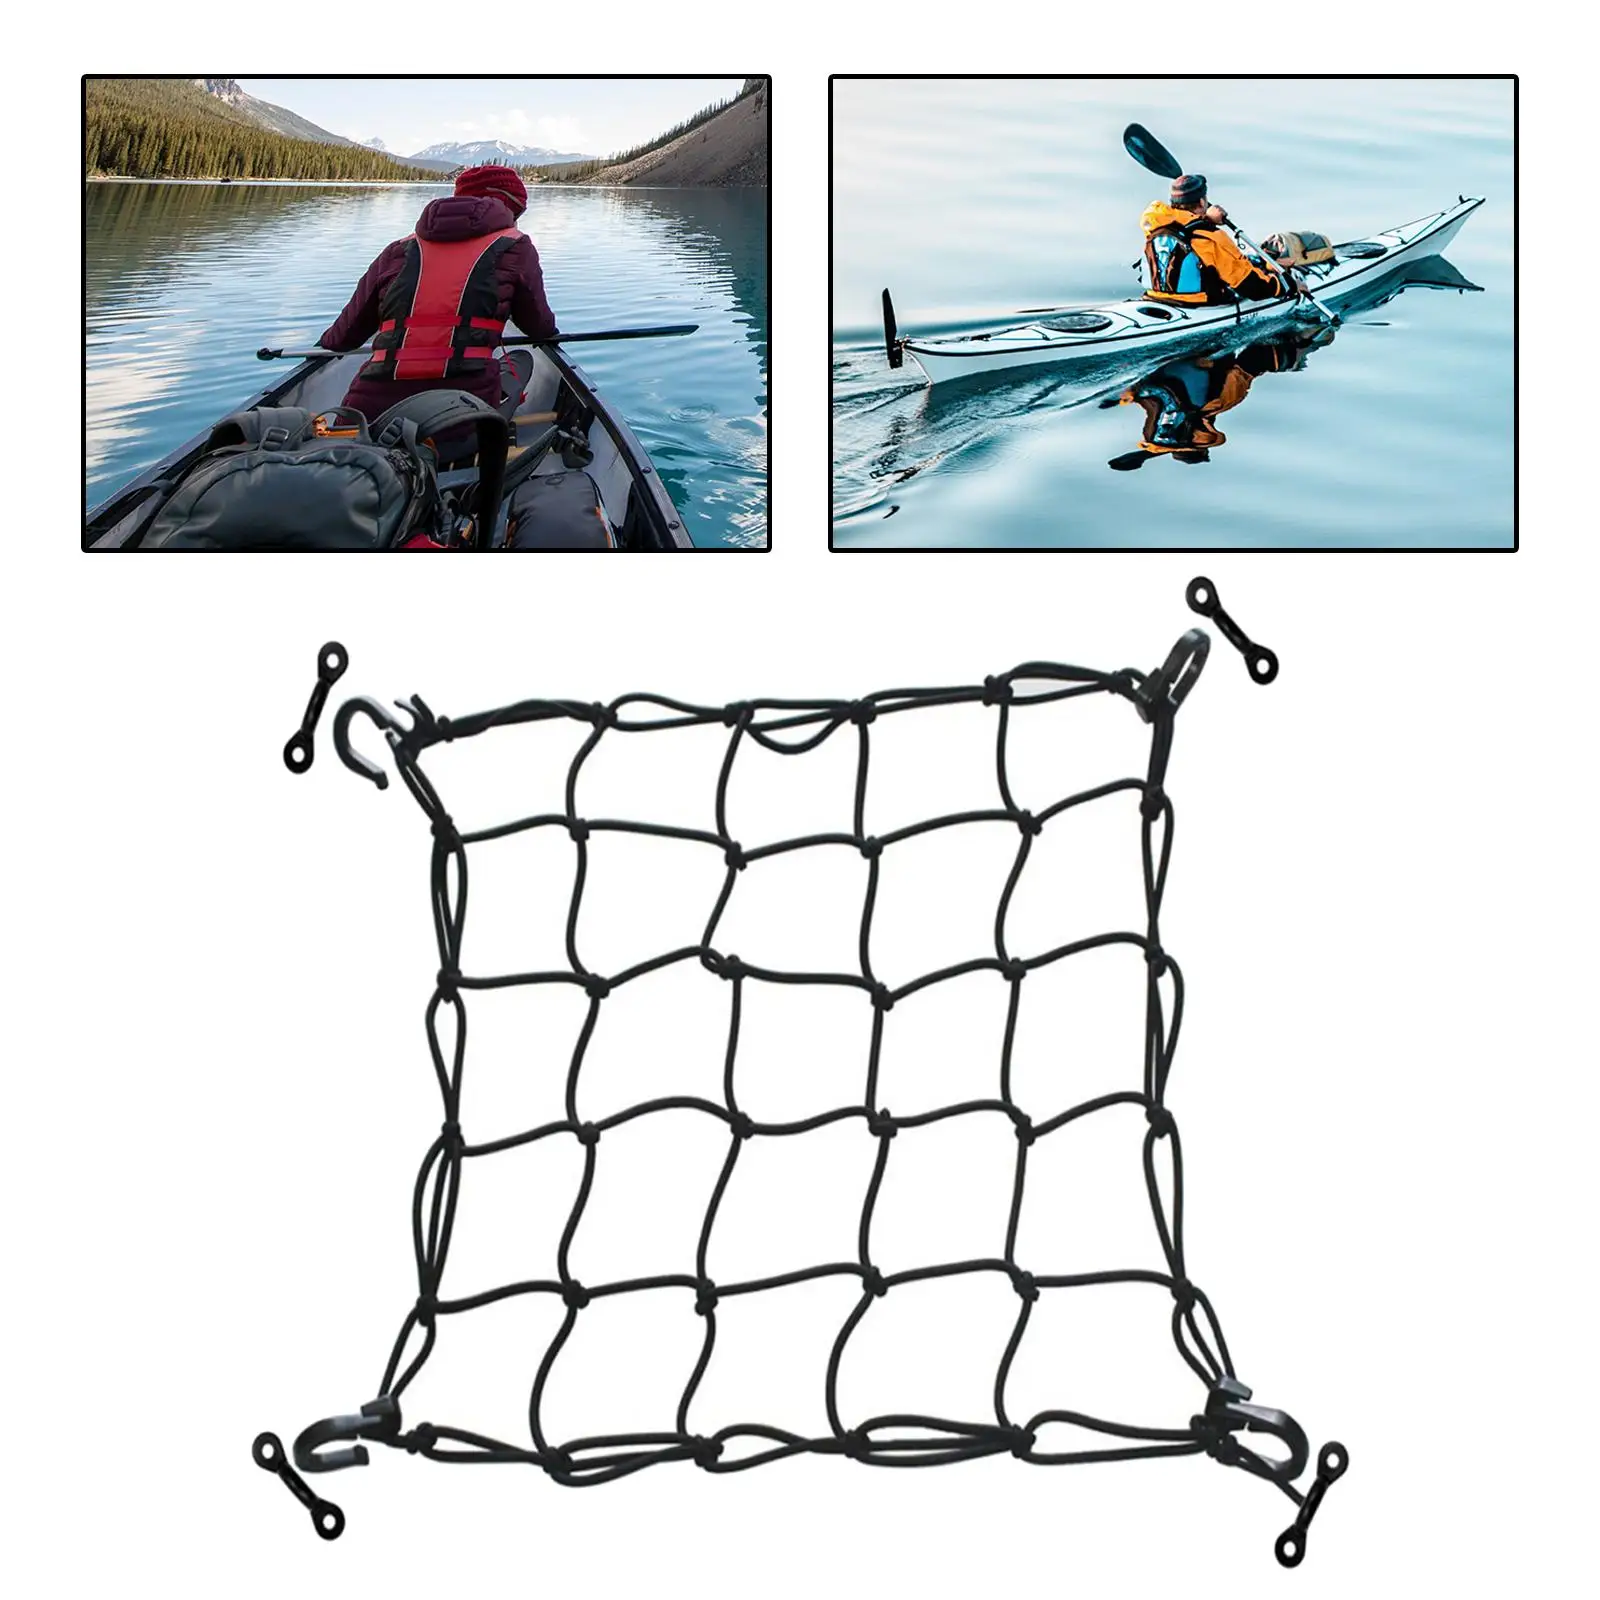 38x38cm Deck Cargo Net Accessories with Pad Eyes Heavy Duty Organizer Bungee Net Nylon for Kayak Marine Canoe Rigging Truck Bed